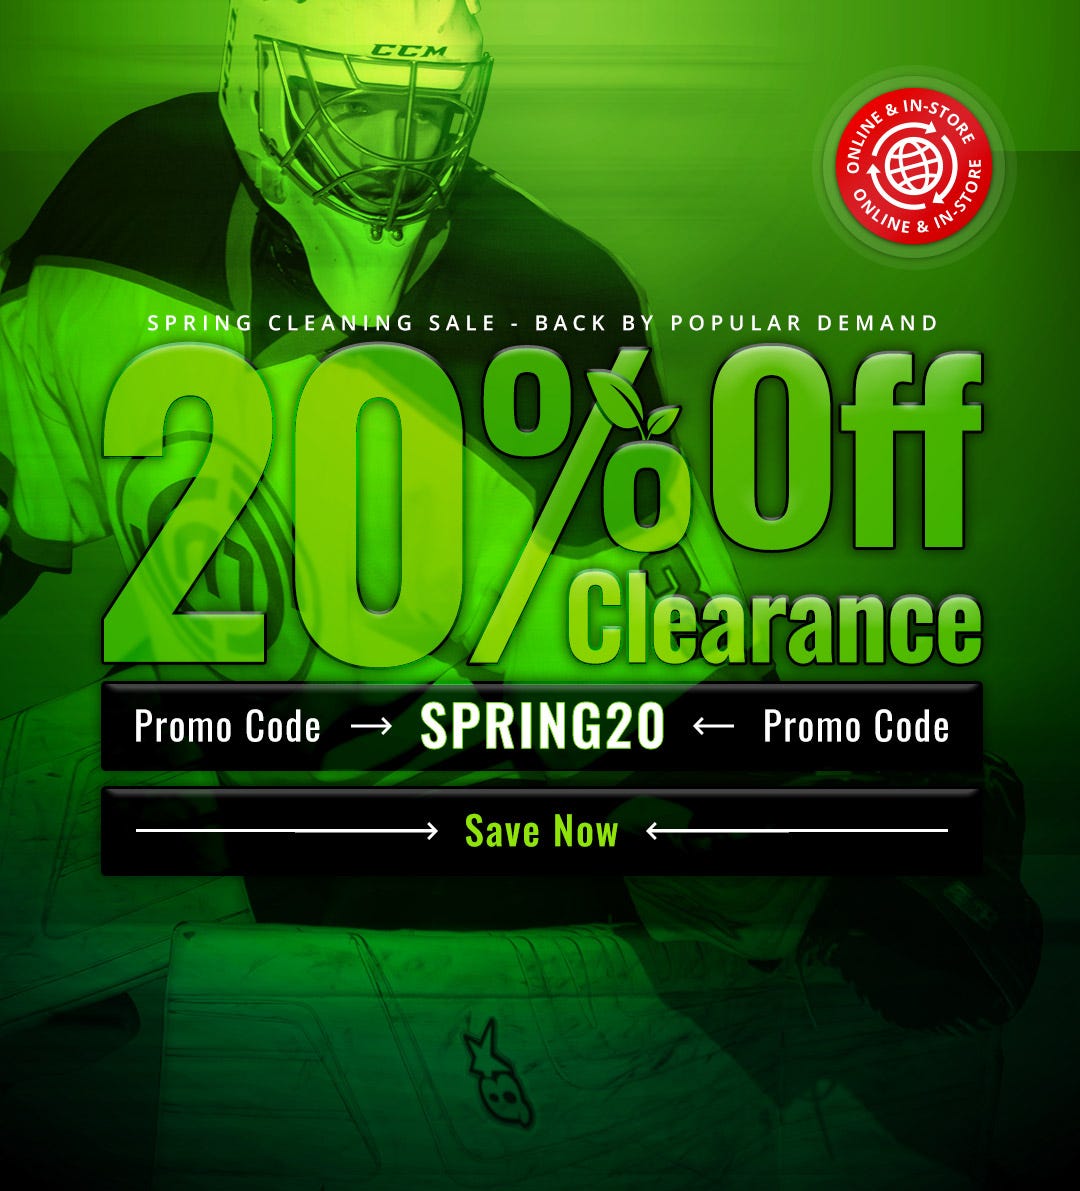 Spring Cleaning Sale - Back by Popular Demand: 20% Off Clearance